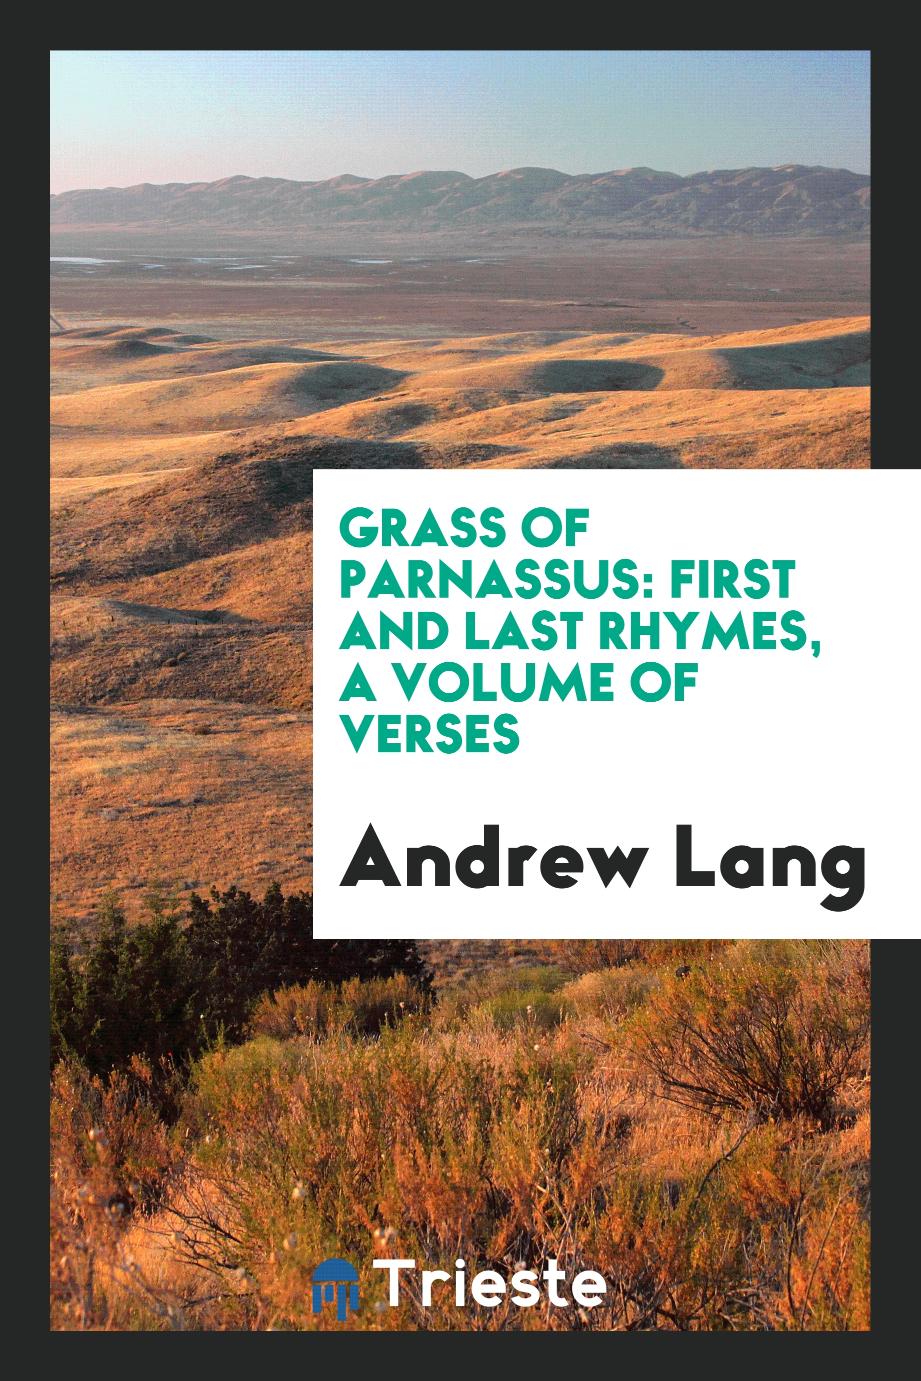 Grass of Parnassus: first and last rhymes, A volume of verses